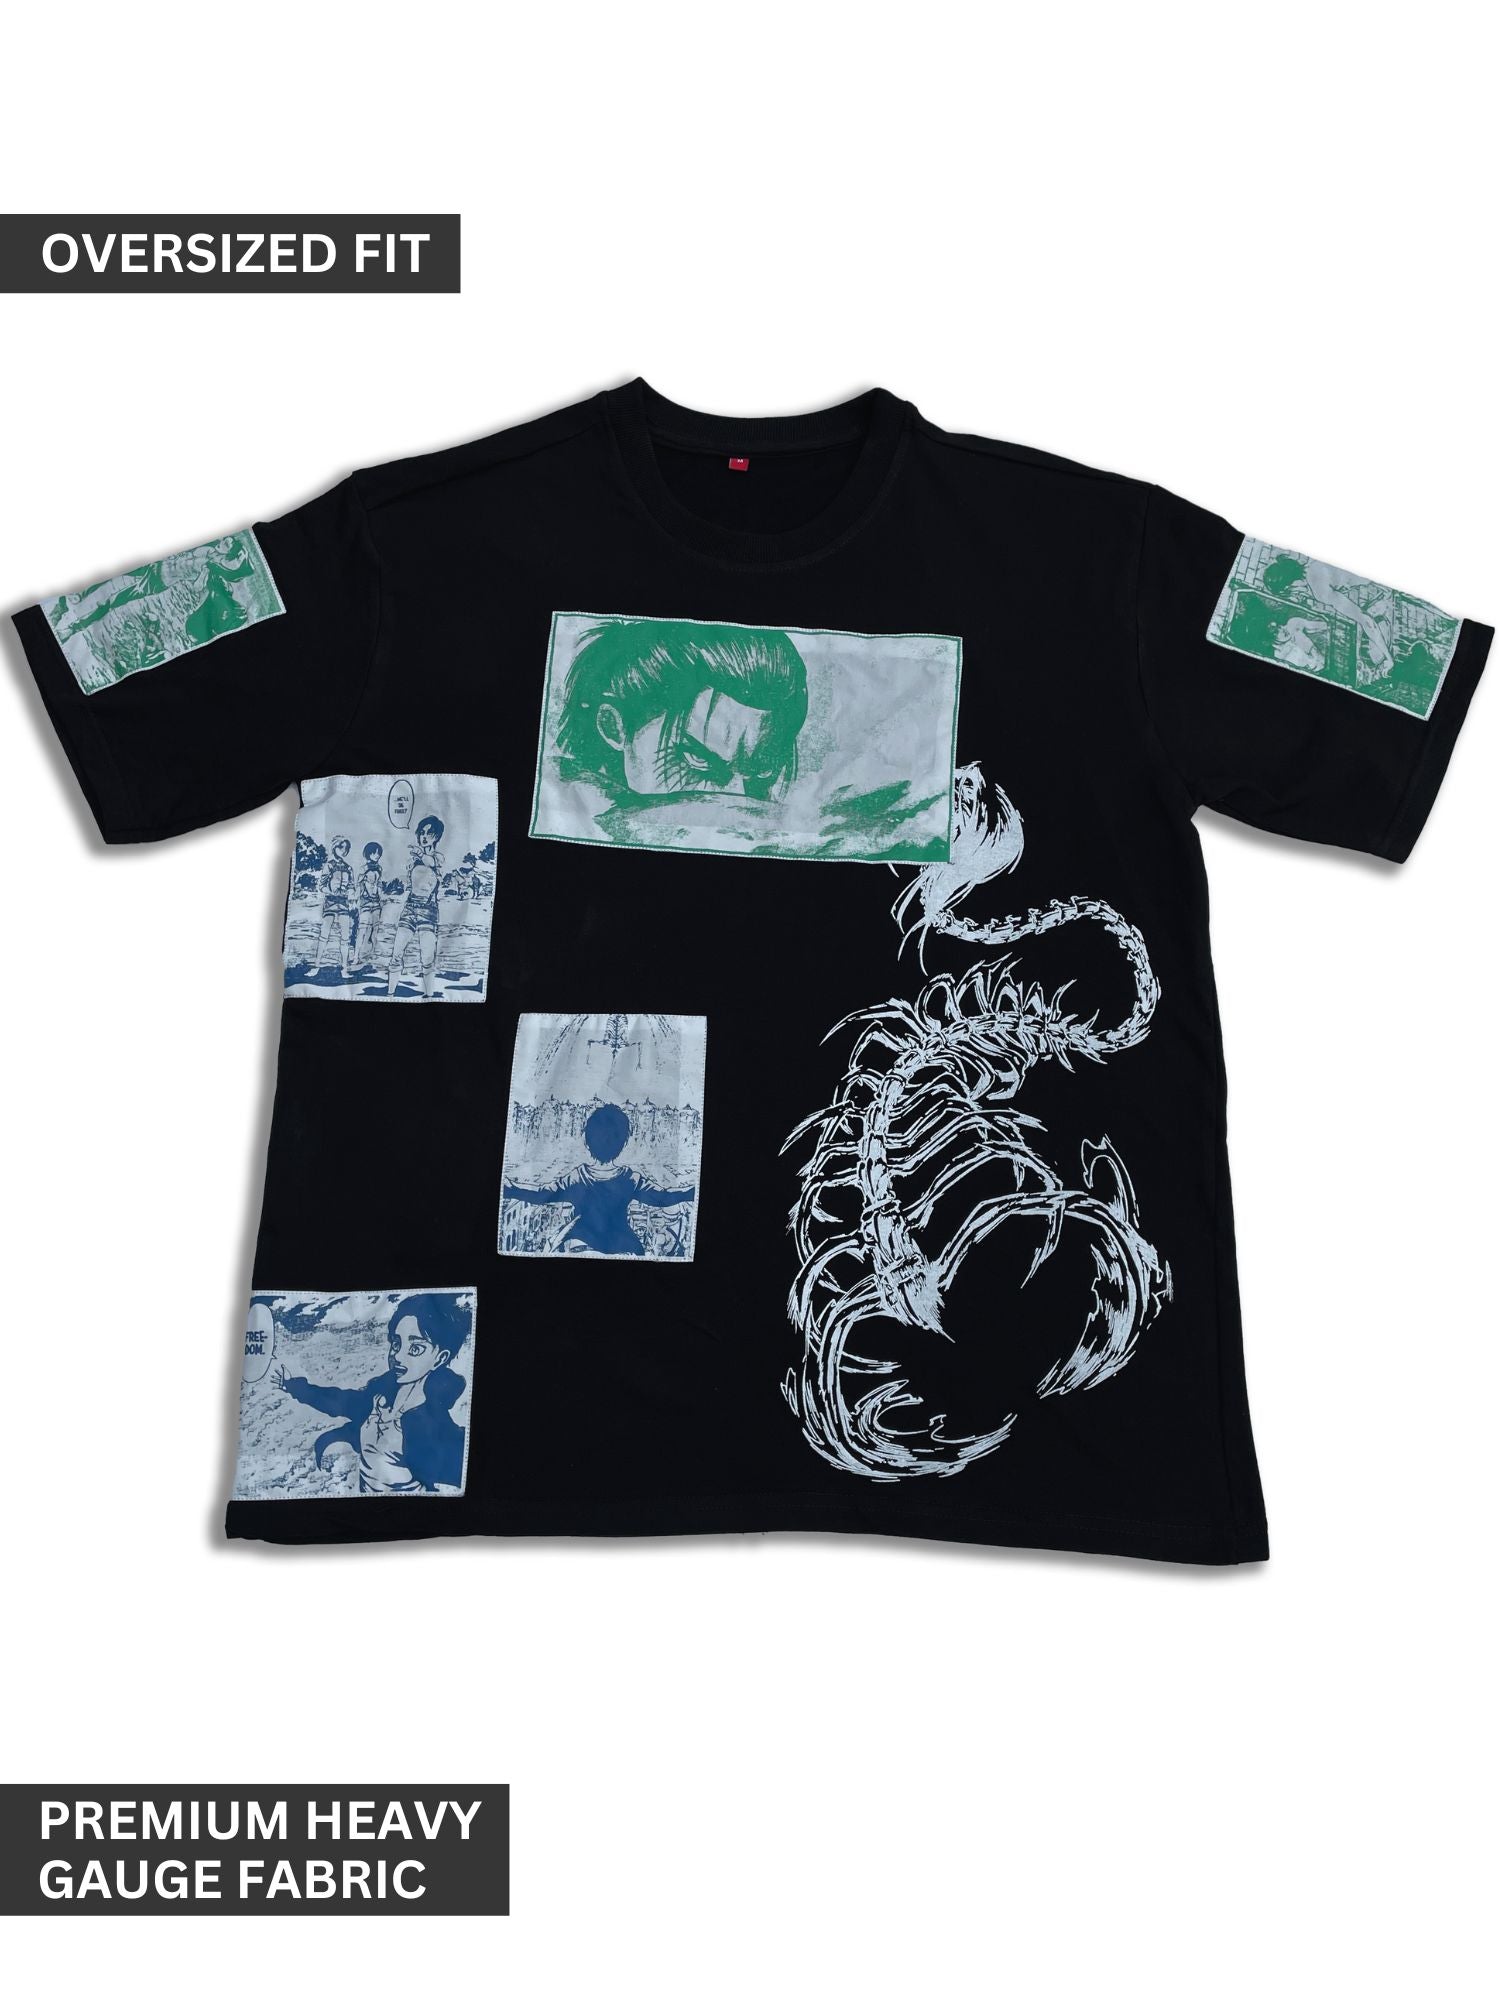 Eren Yeager x Attack on Titan: Oversized AOT Patches with Scorpion T-Shirt